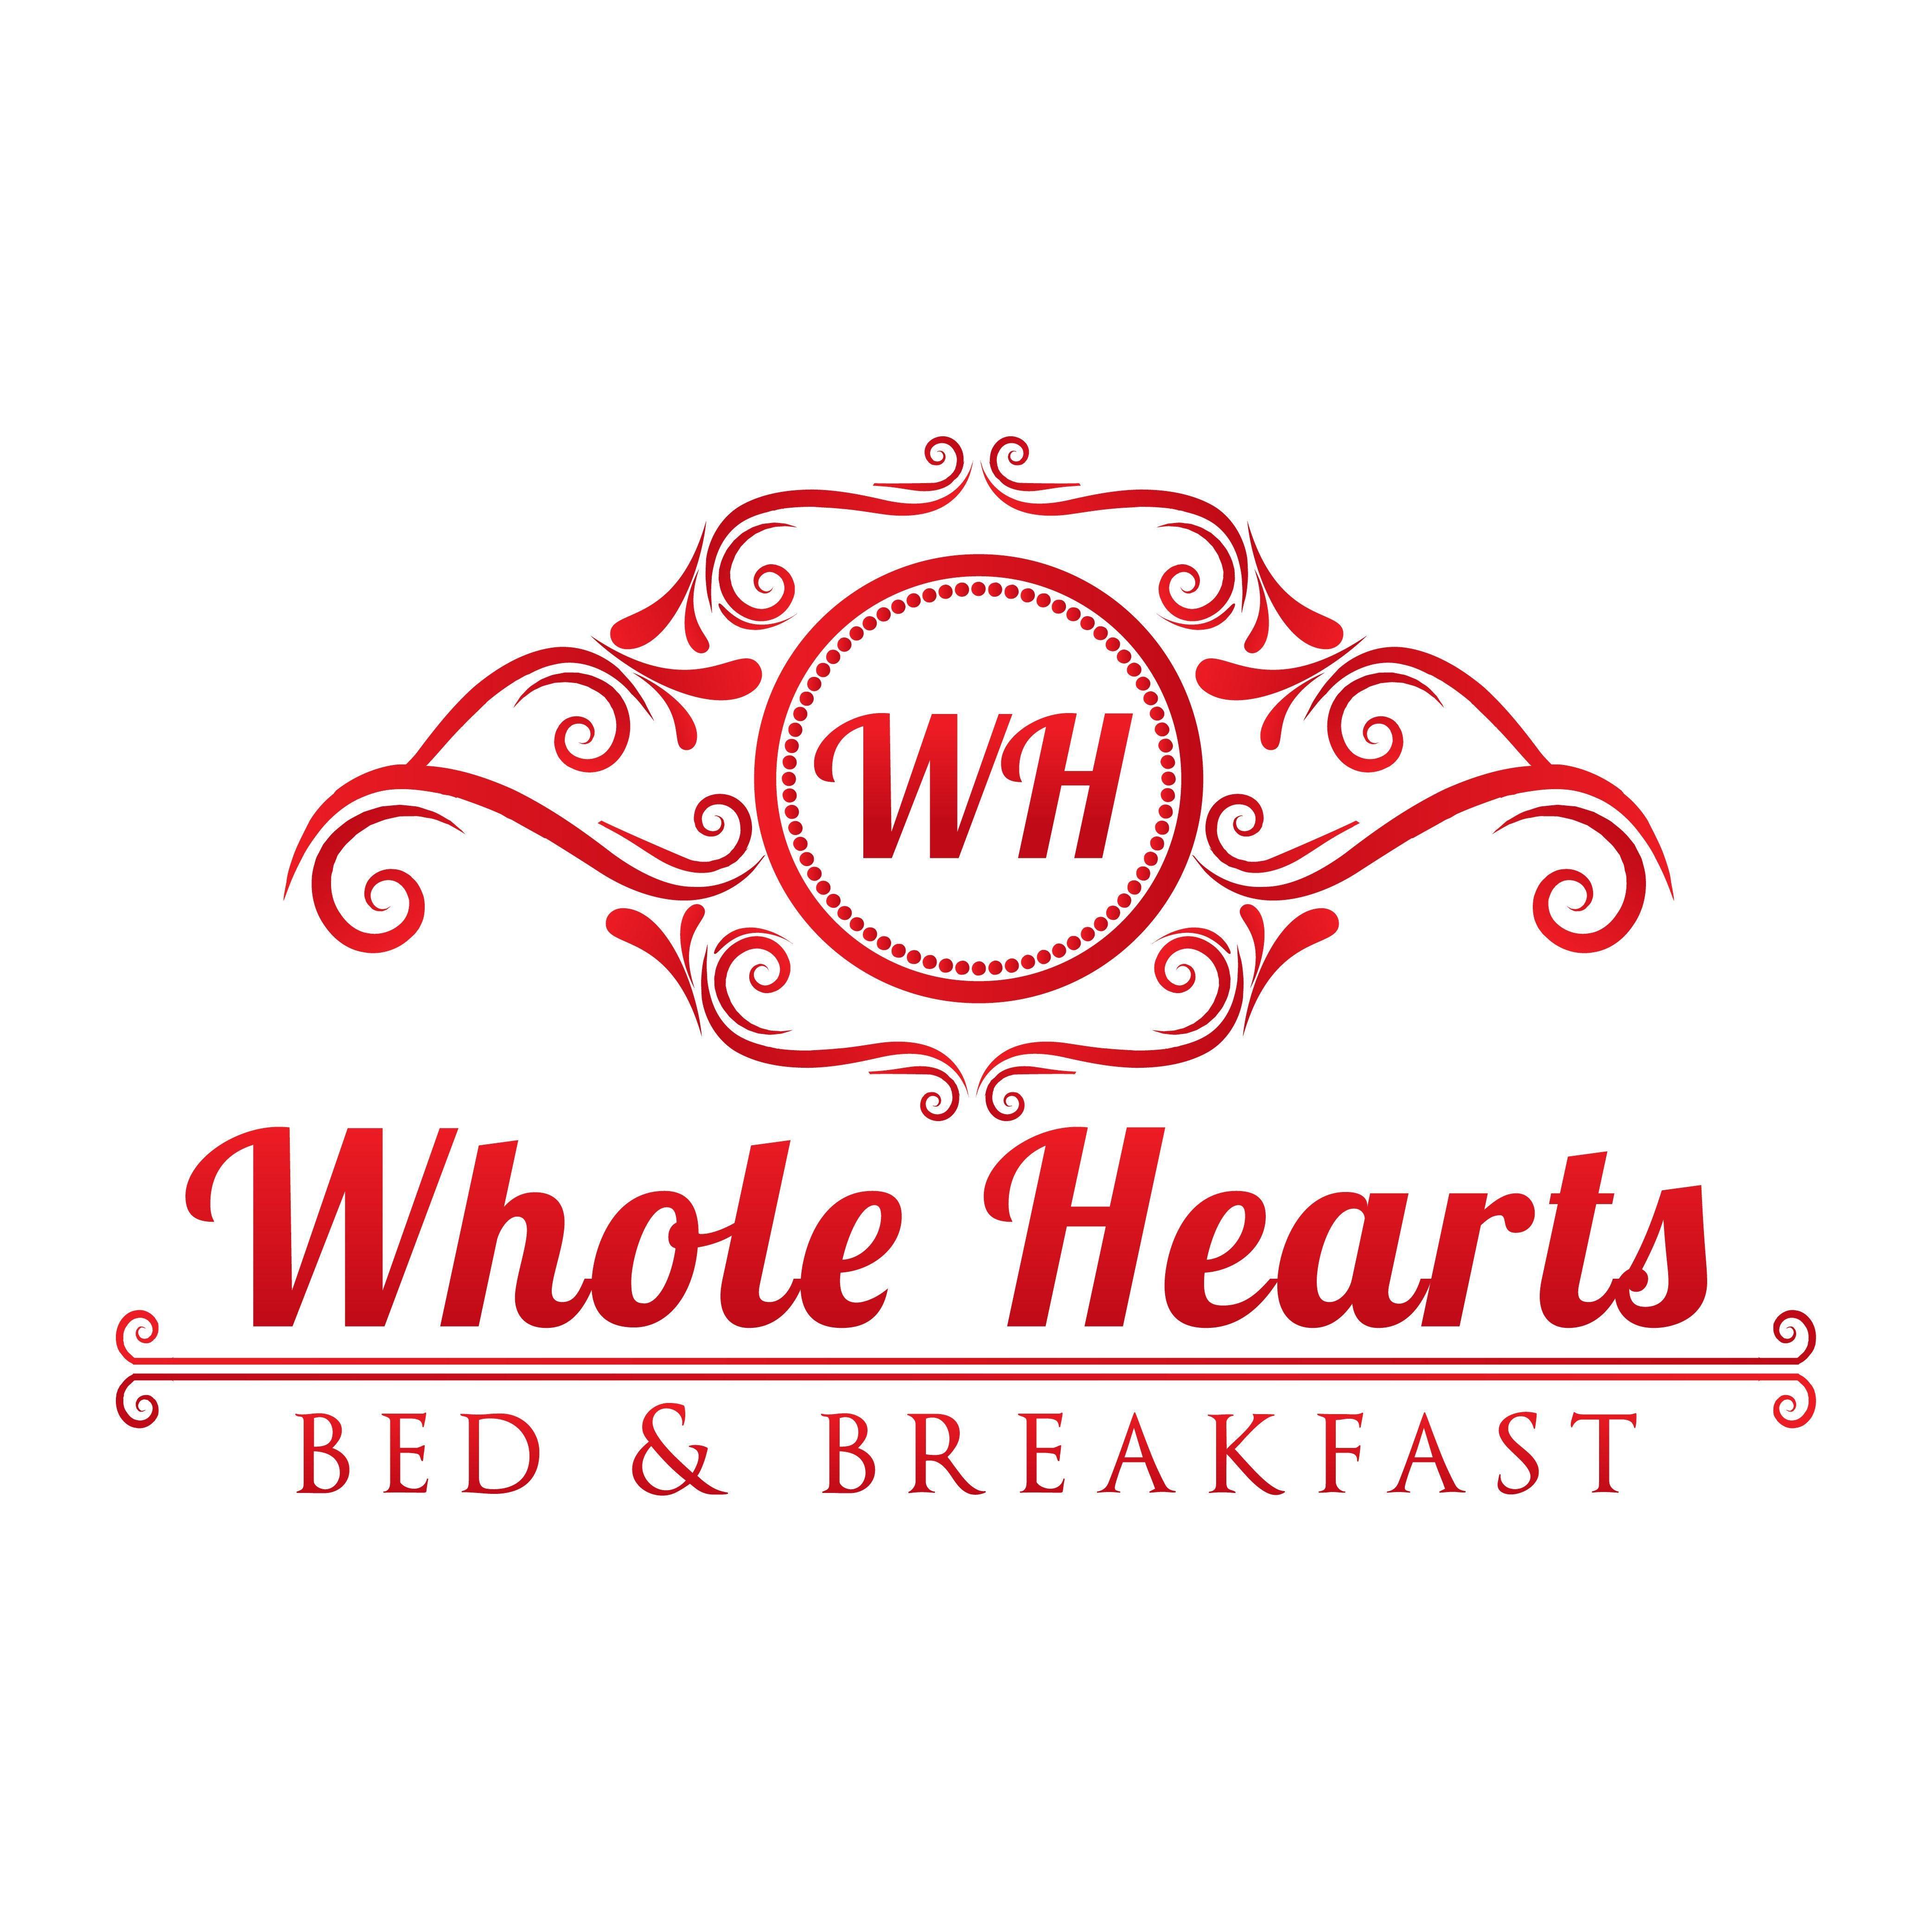 Whole Hearts Bed and Breakfast, LLC